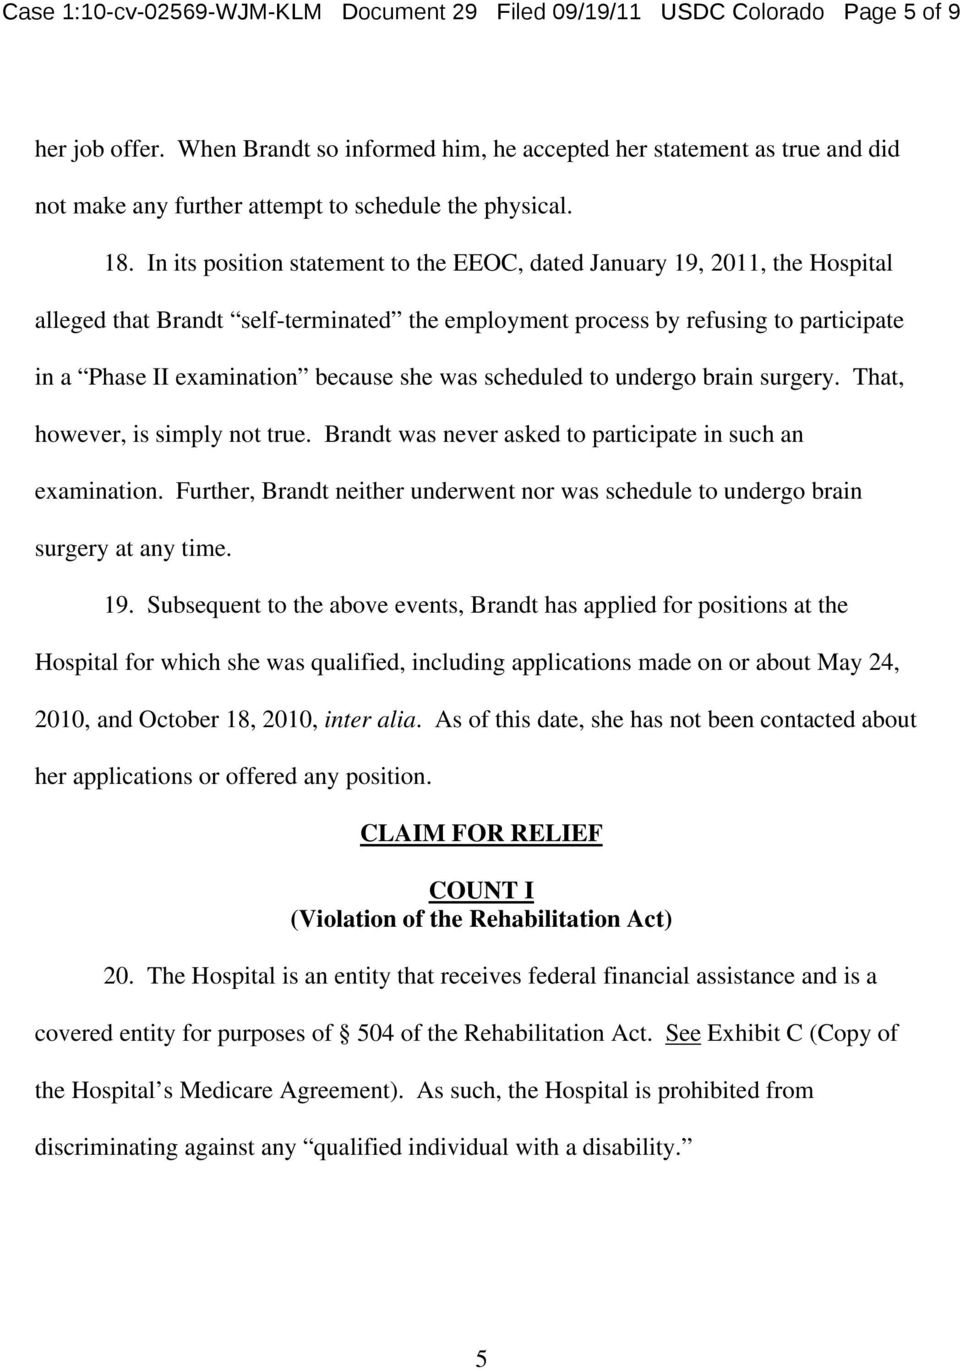 In its position statement to the EEOC, dated January 19, 2011, the Hospital alleged that Brandt self-terminated the employment process by refusing to participate in a Phase II examination because she